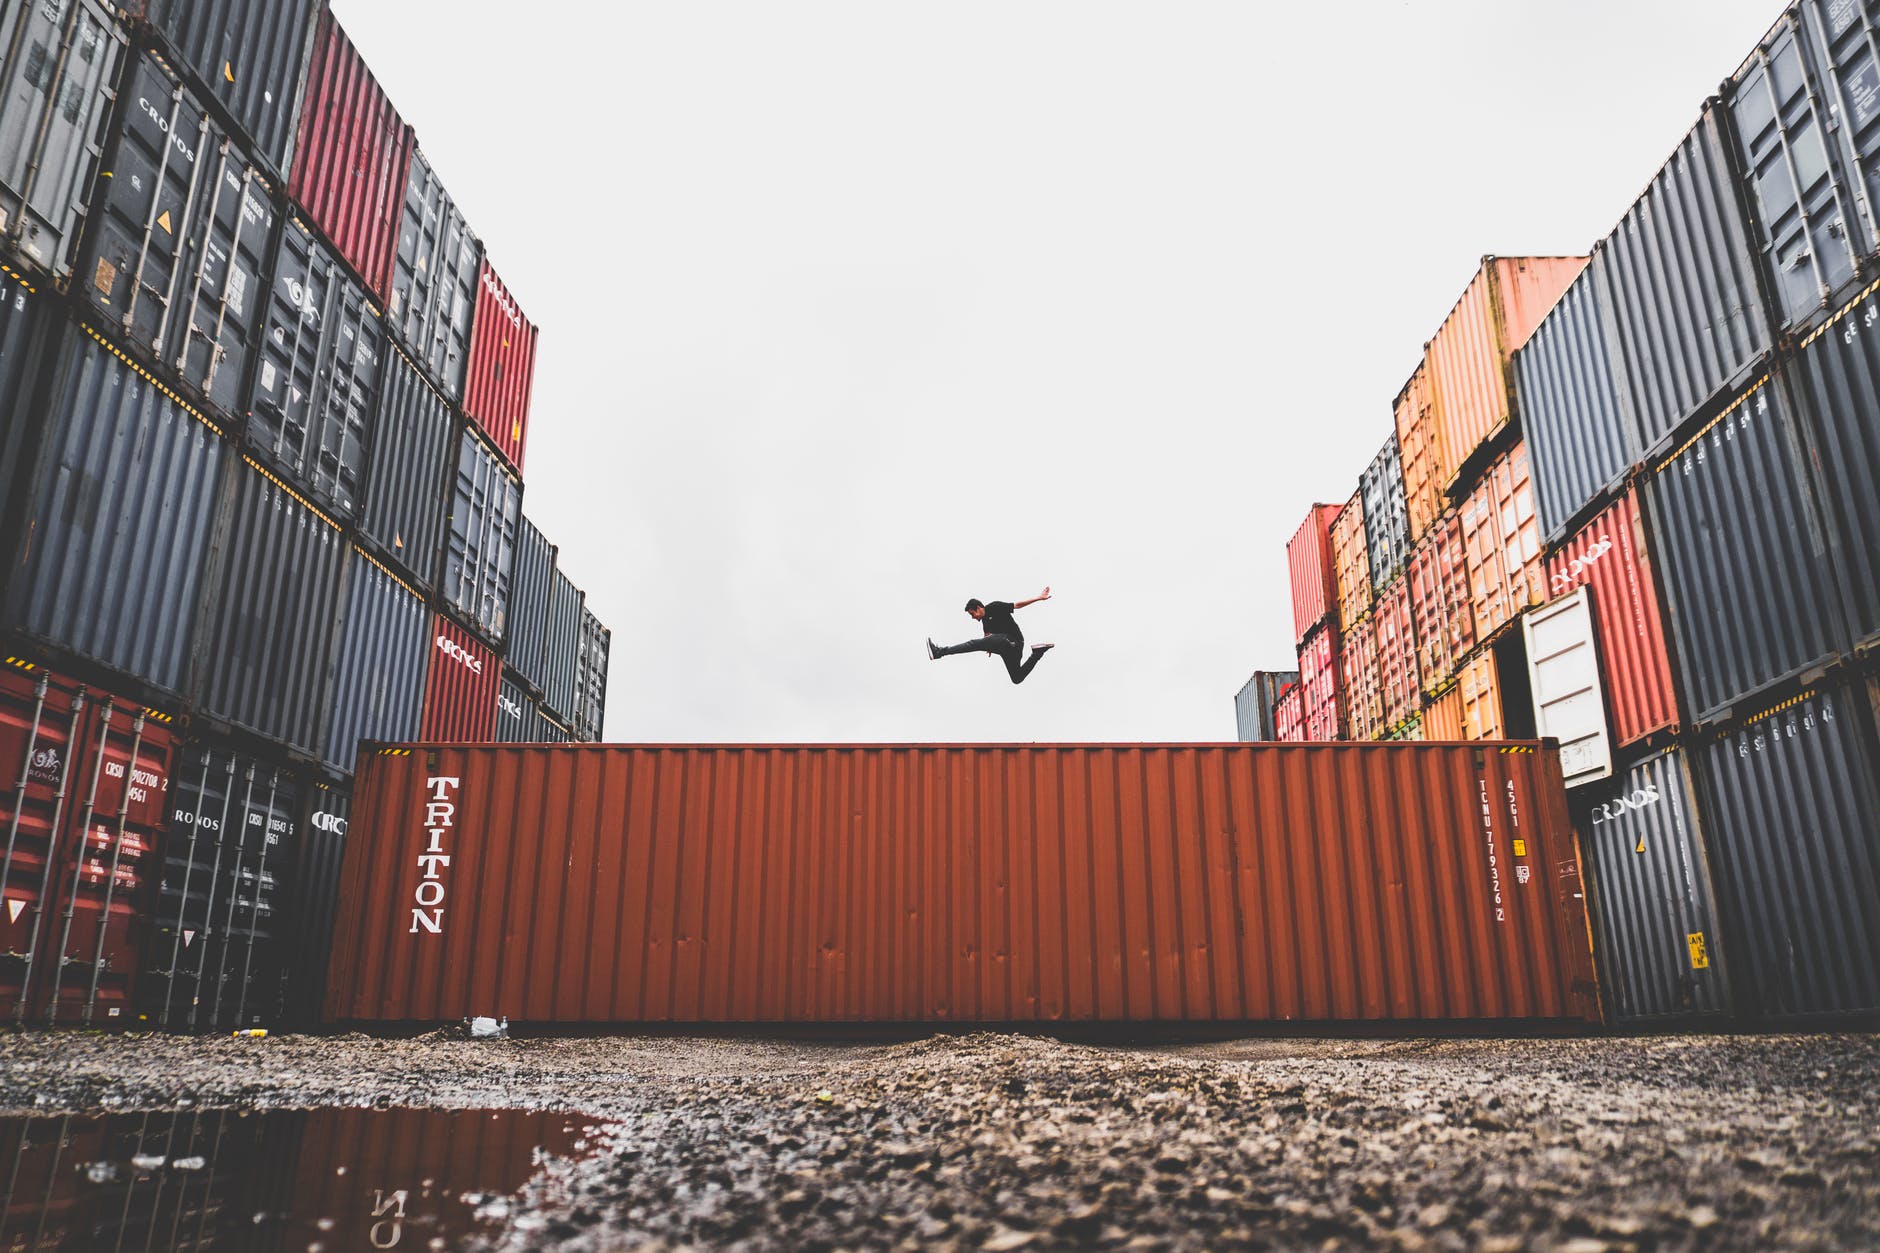 man leaping over shipping containers